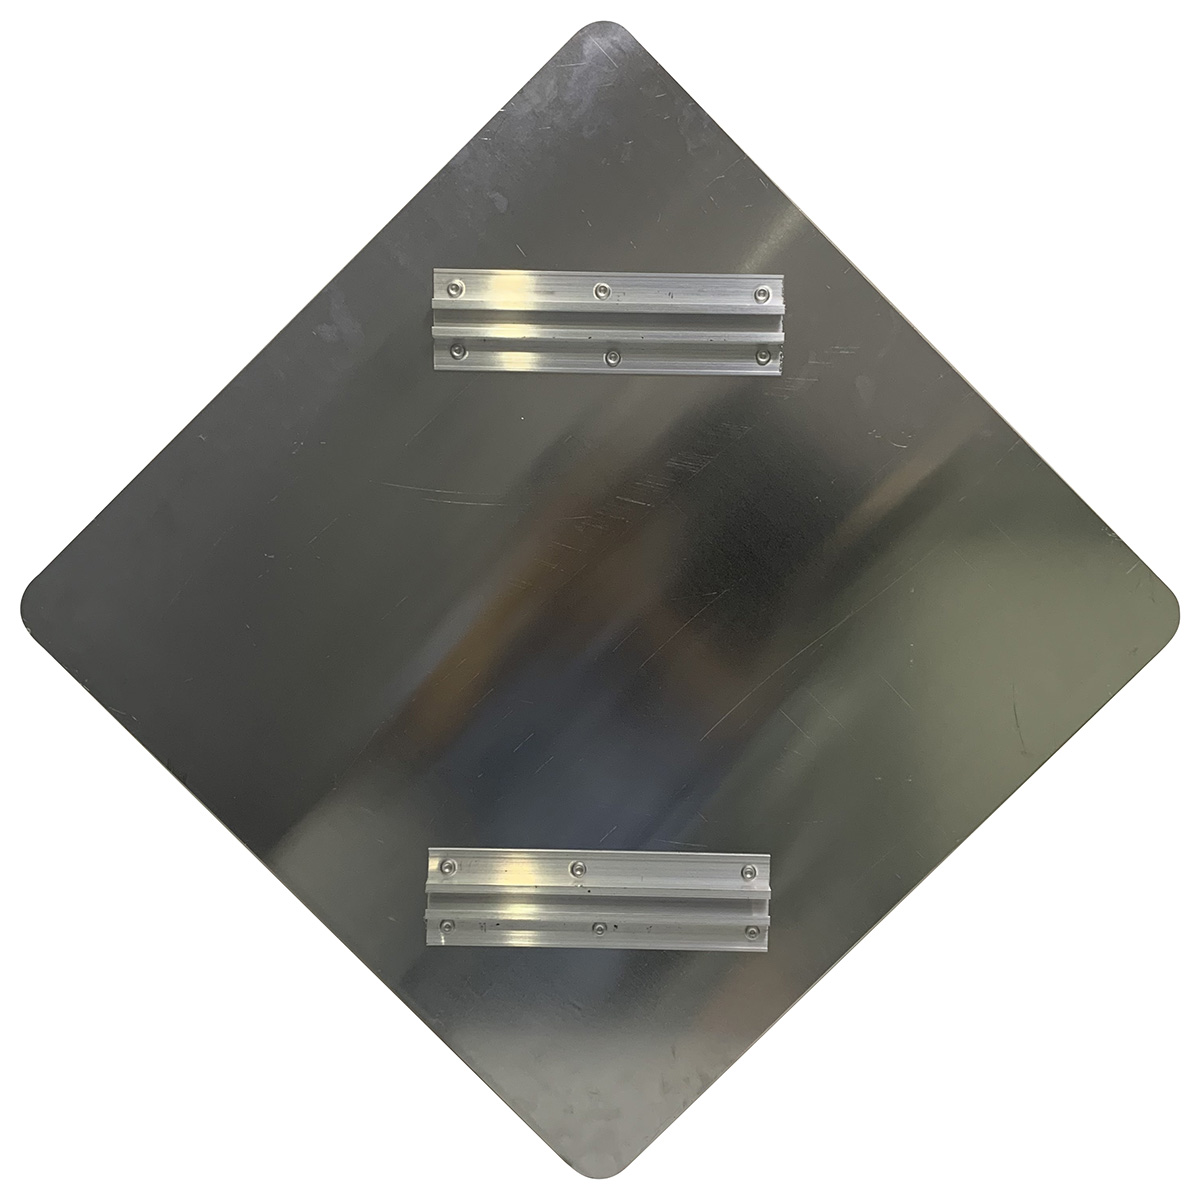 Reflective Aluminium Plate for Roadway Caution Sign